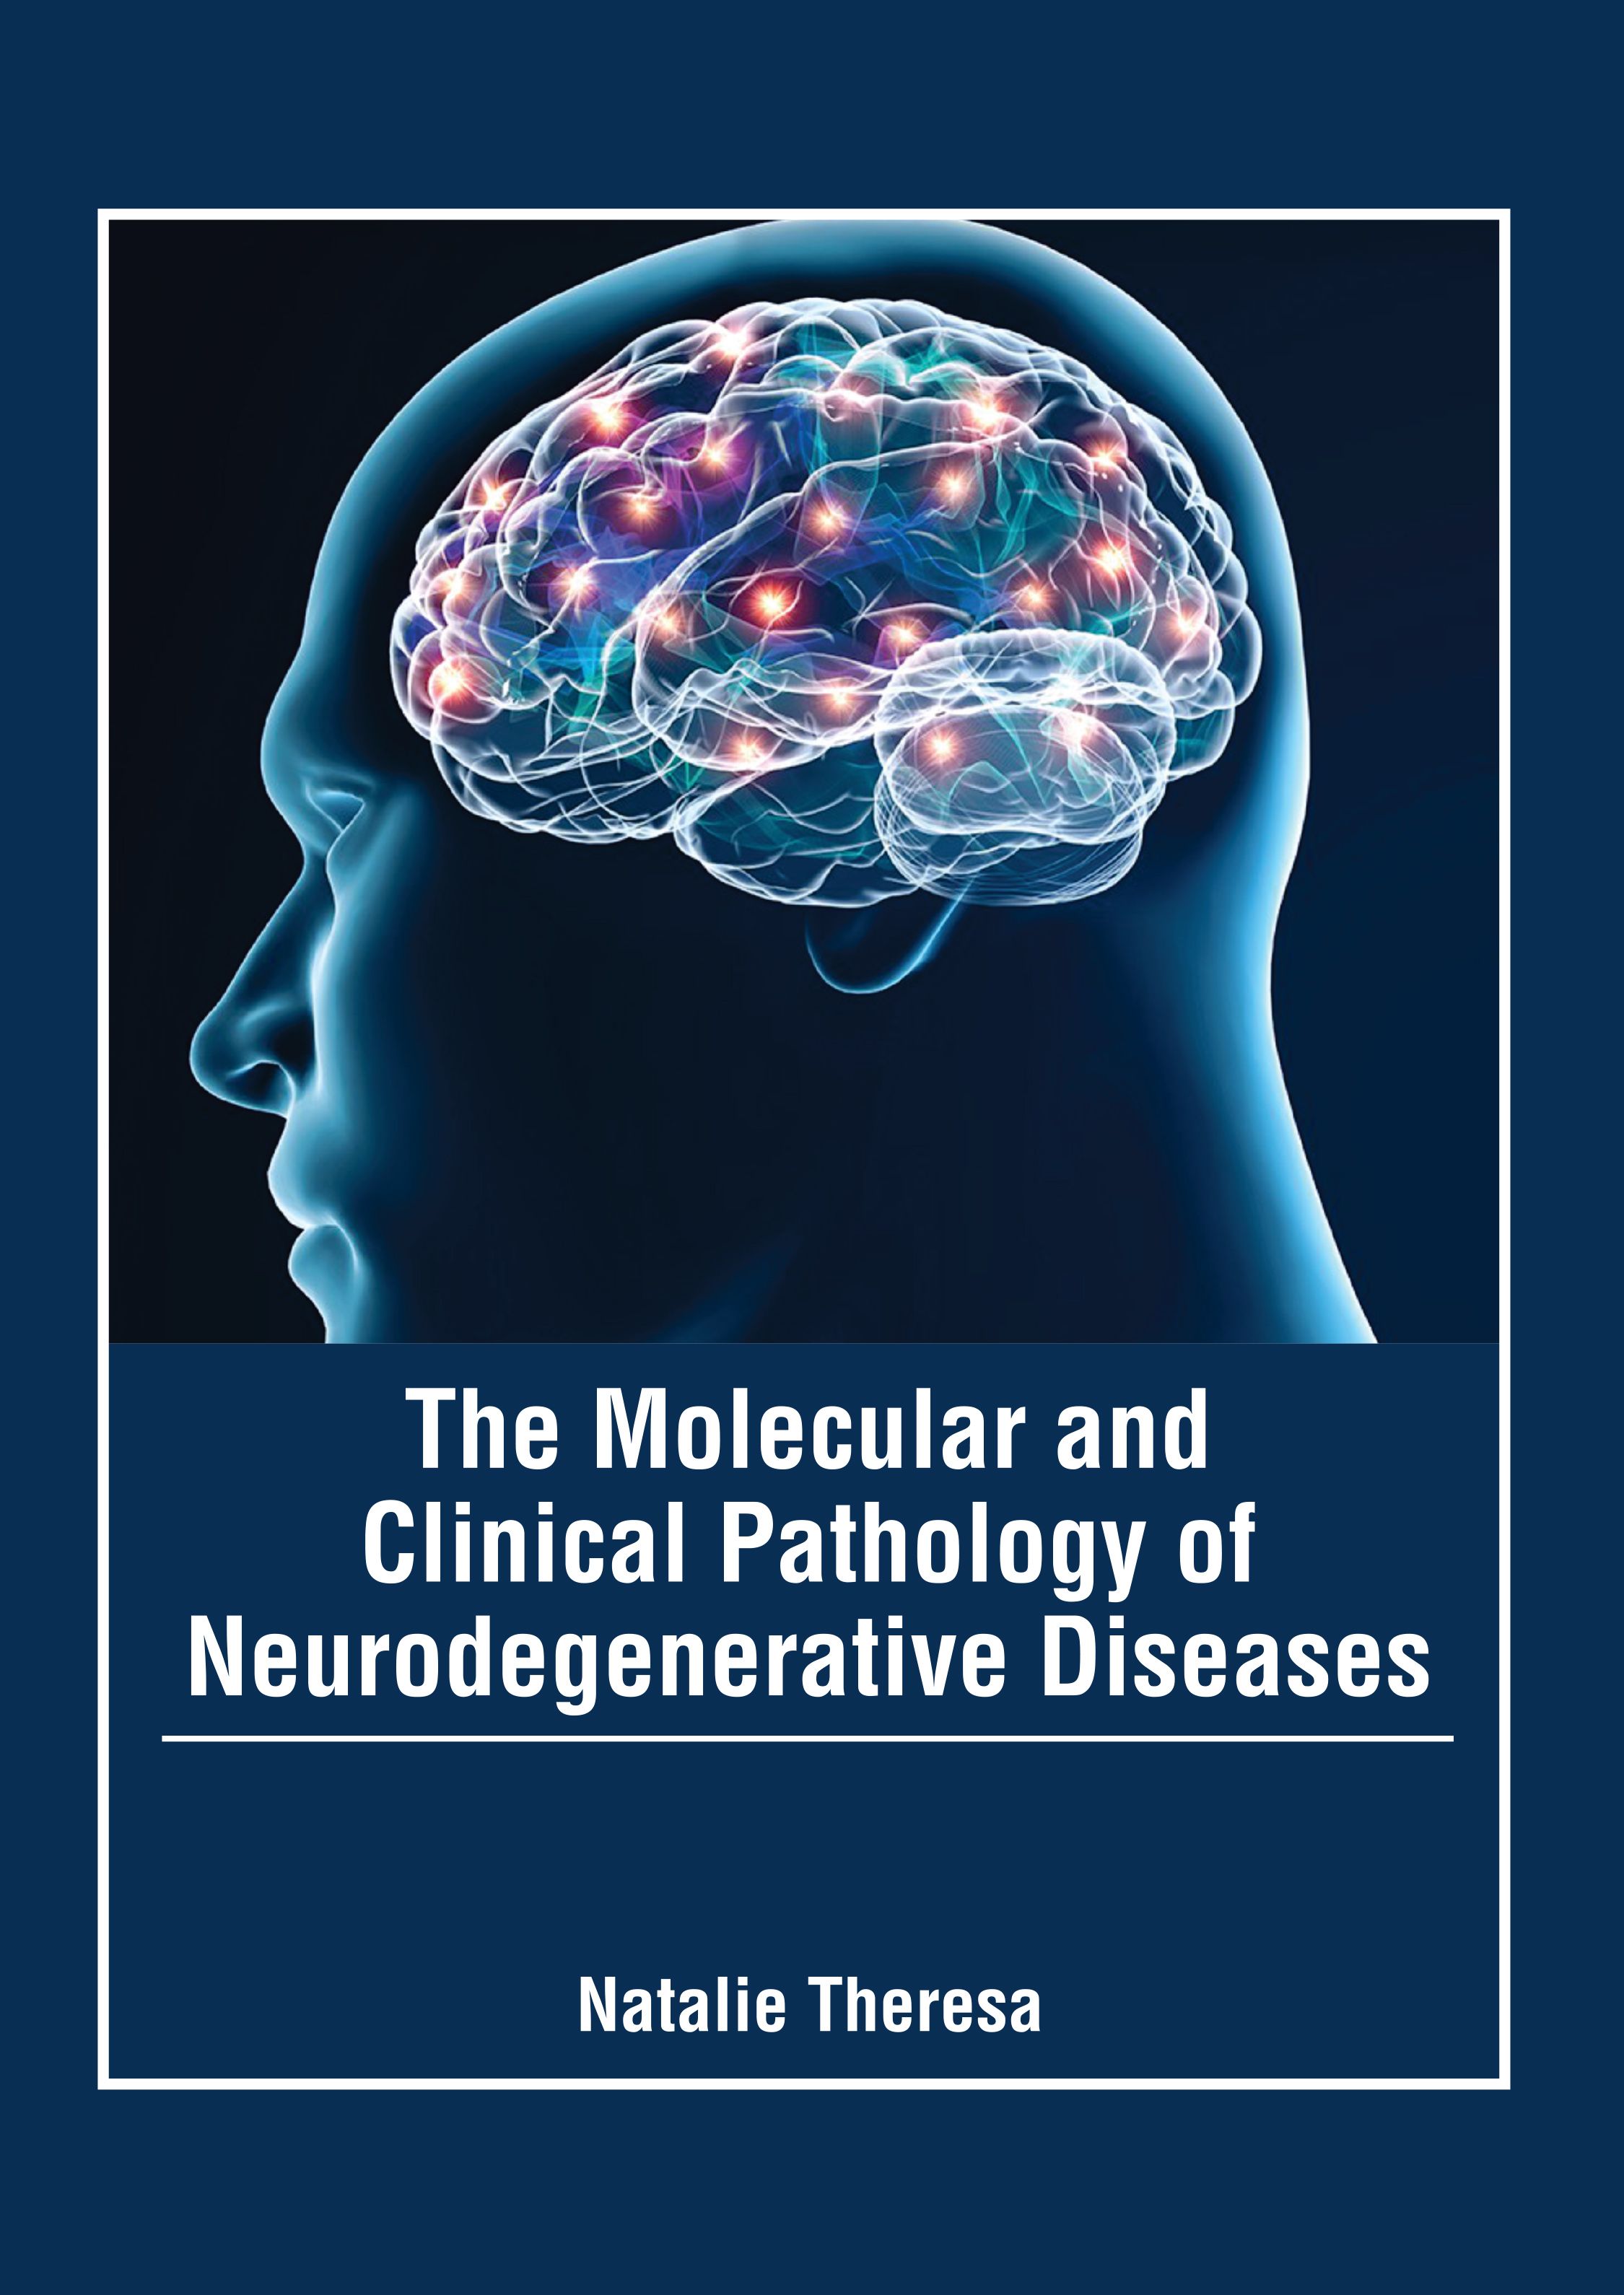 THE MOLECULAR AND CLINICAL PATHOLOGY OF NEURODEGENERATIVE DISEASES